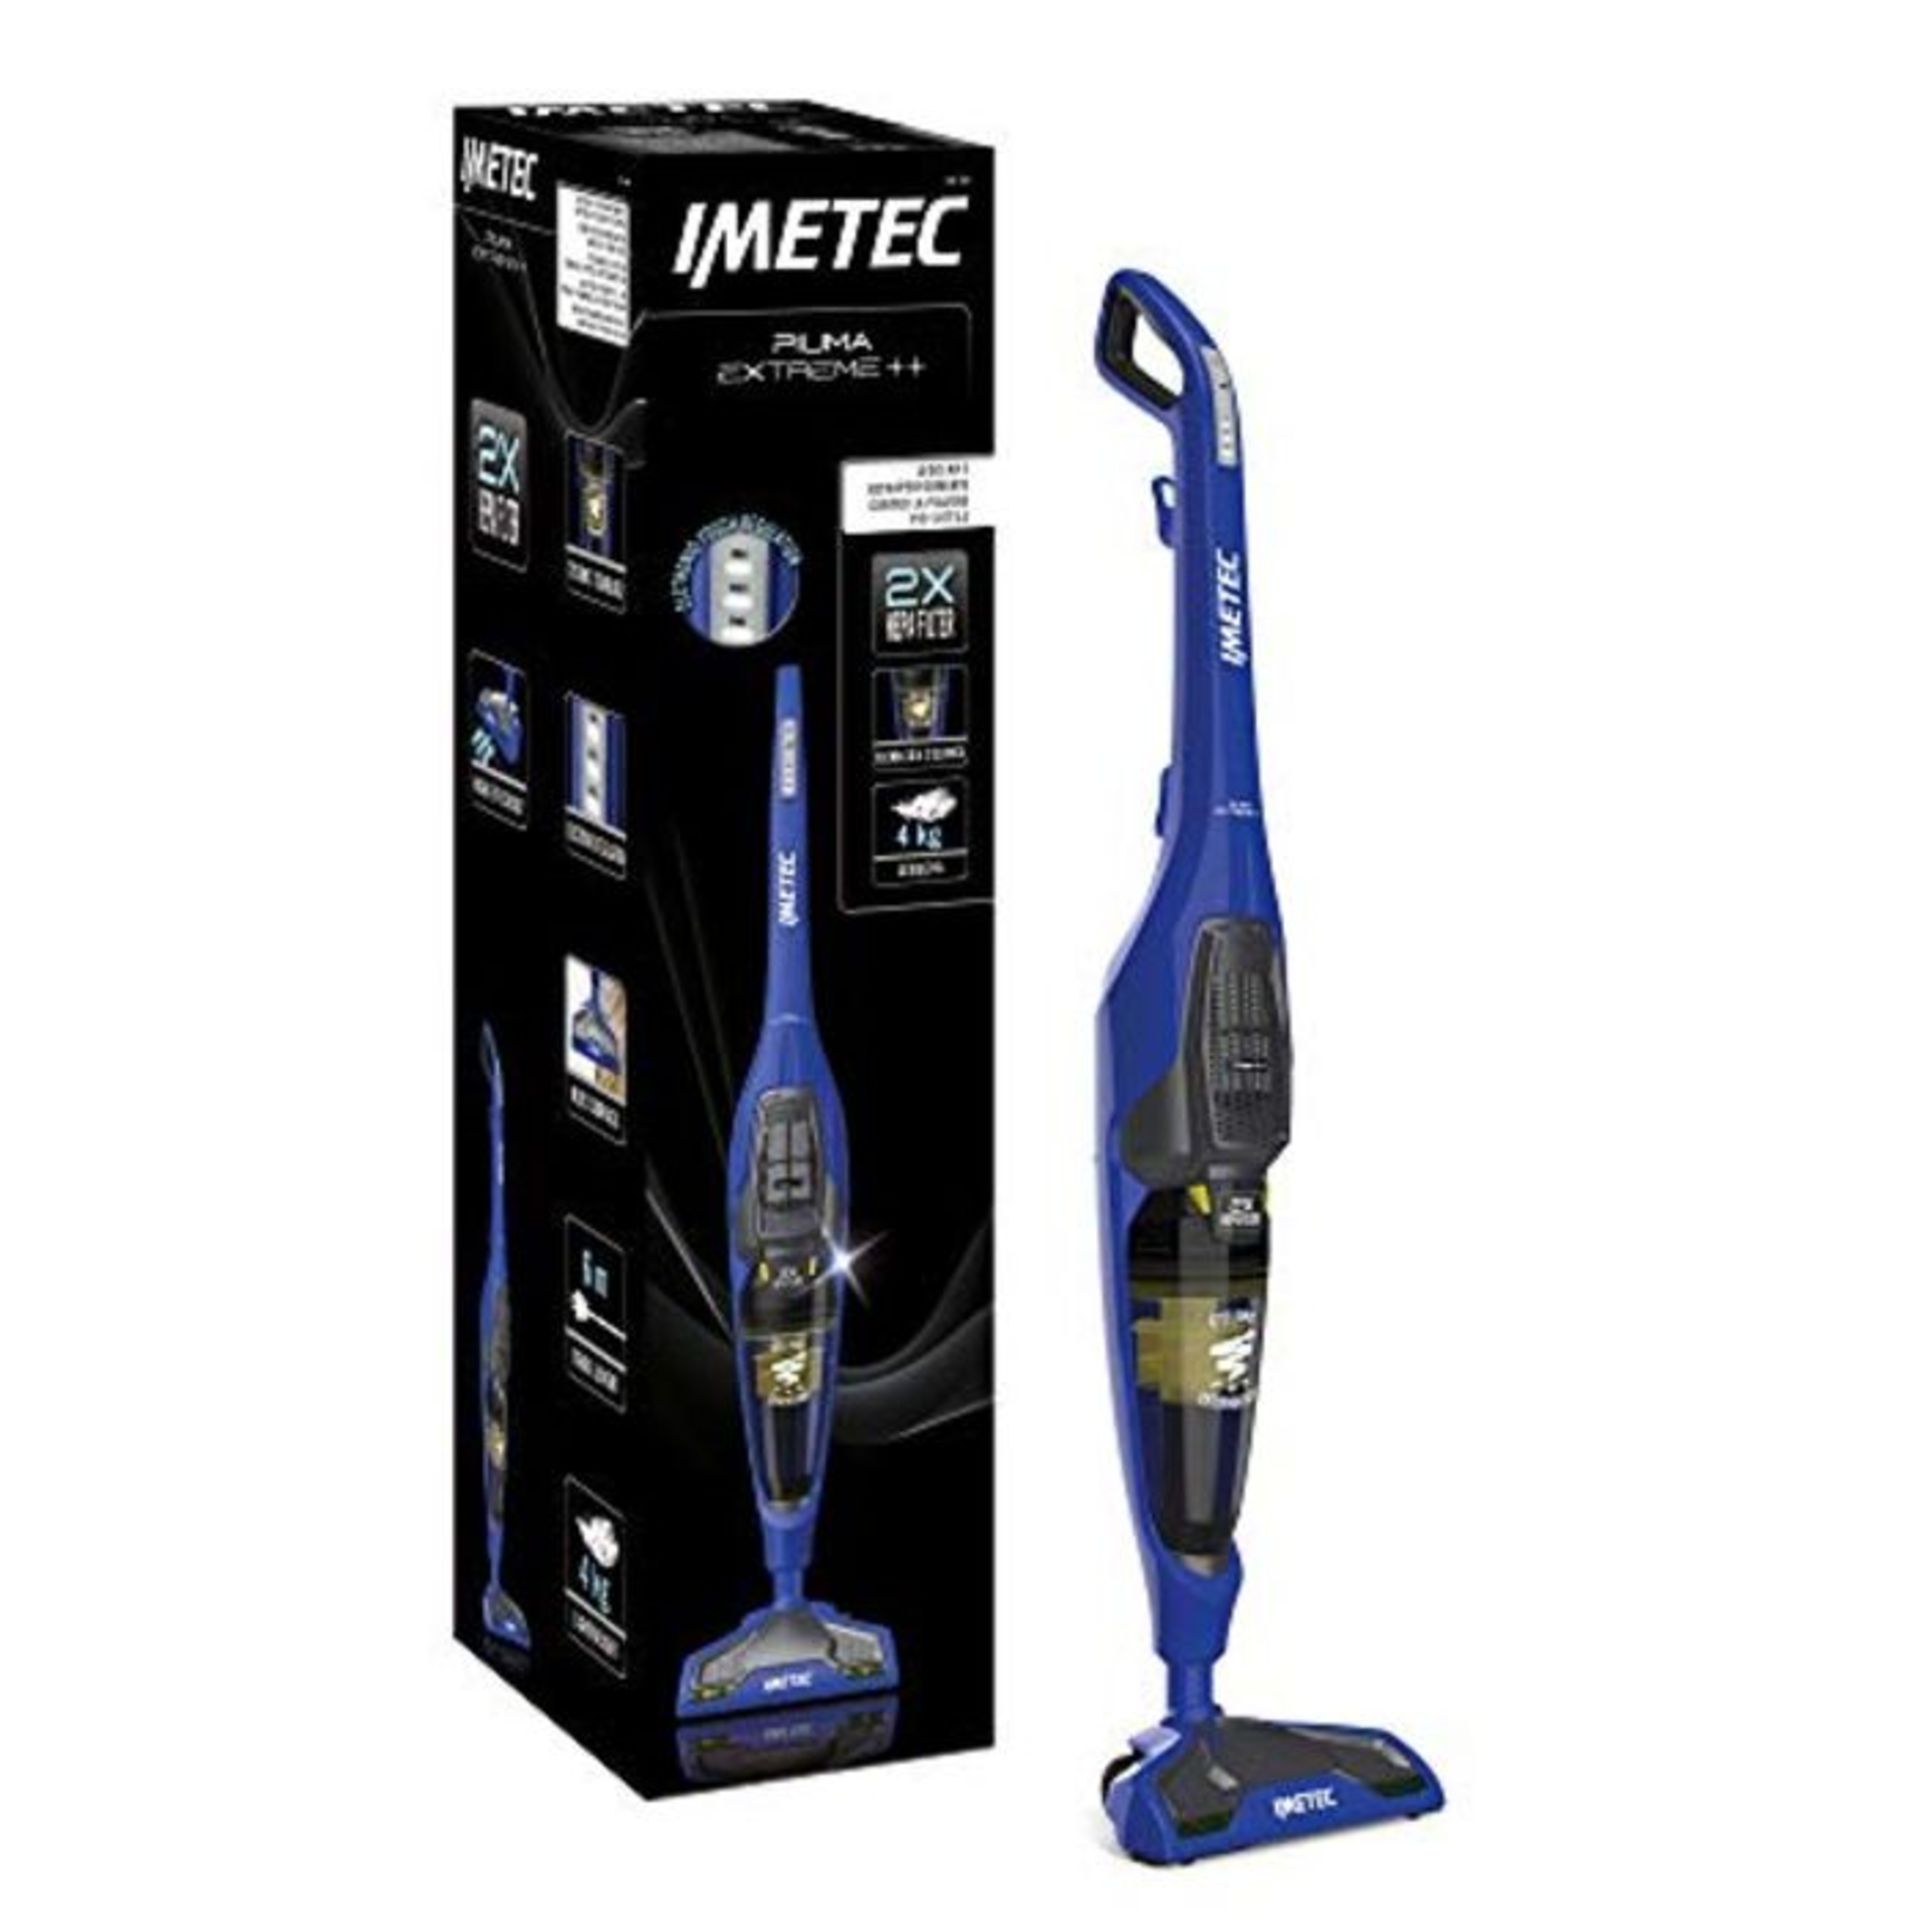 RRP £64.00 Imetec Piuma Extreme++ SC3-100 Vacuum Cleaner with Ciclone Technology without Sacco, E